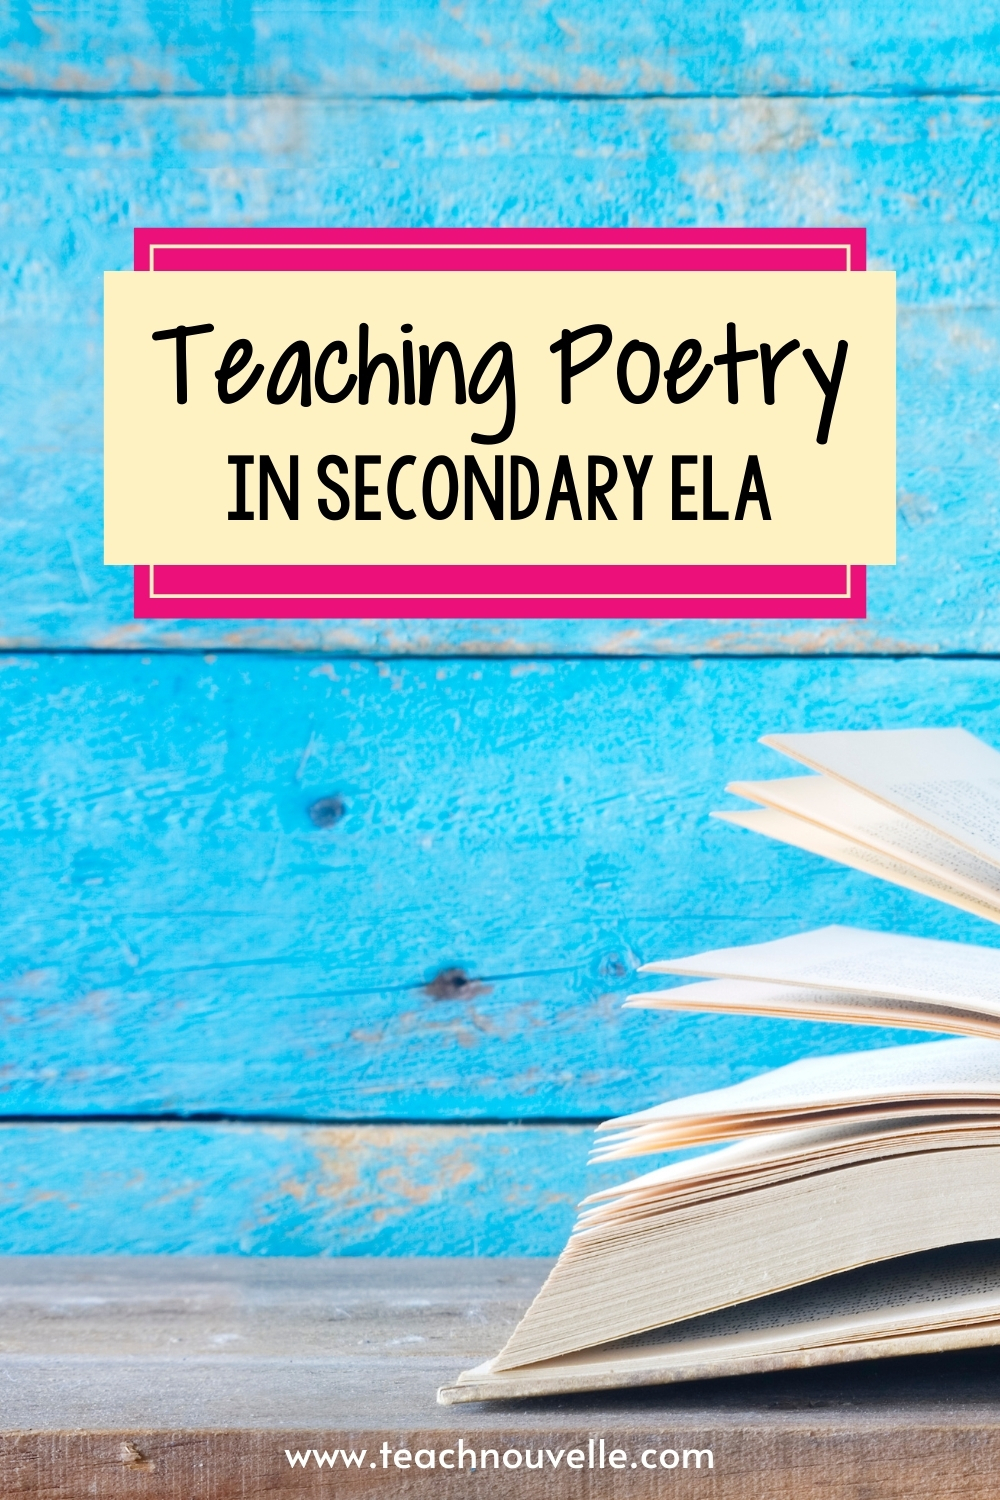 An open book in front of a blue wooden wall with the overlayed text "Teaching Poetry In Secondary ELA"